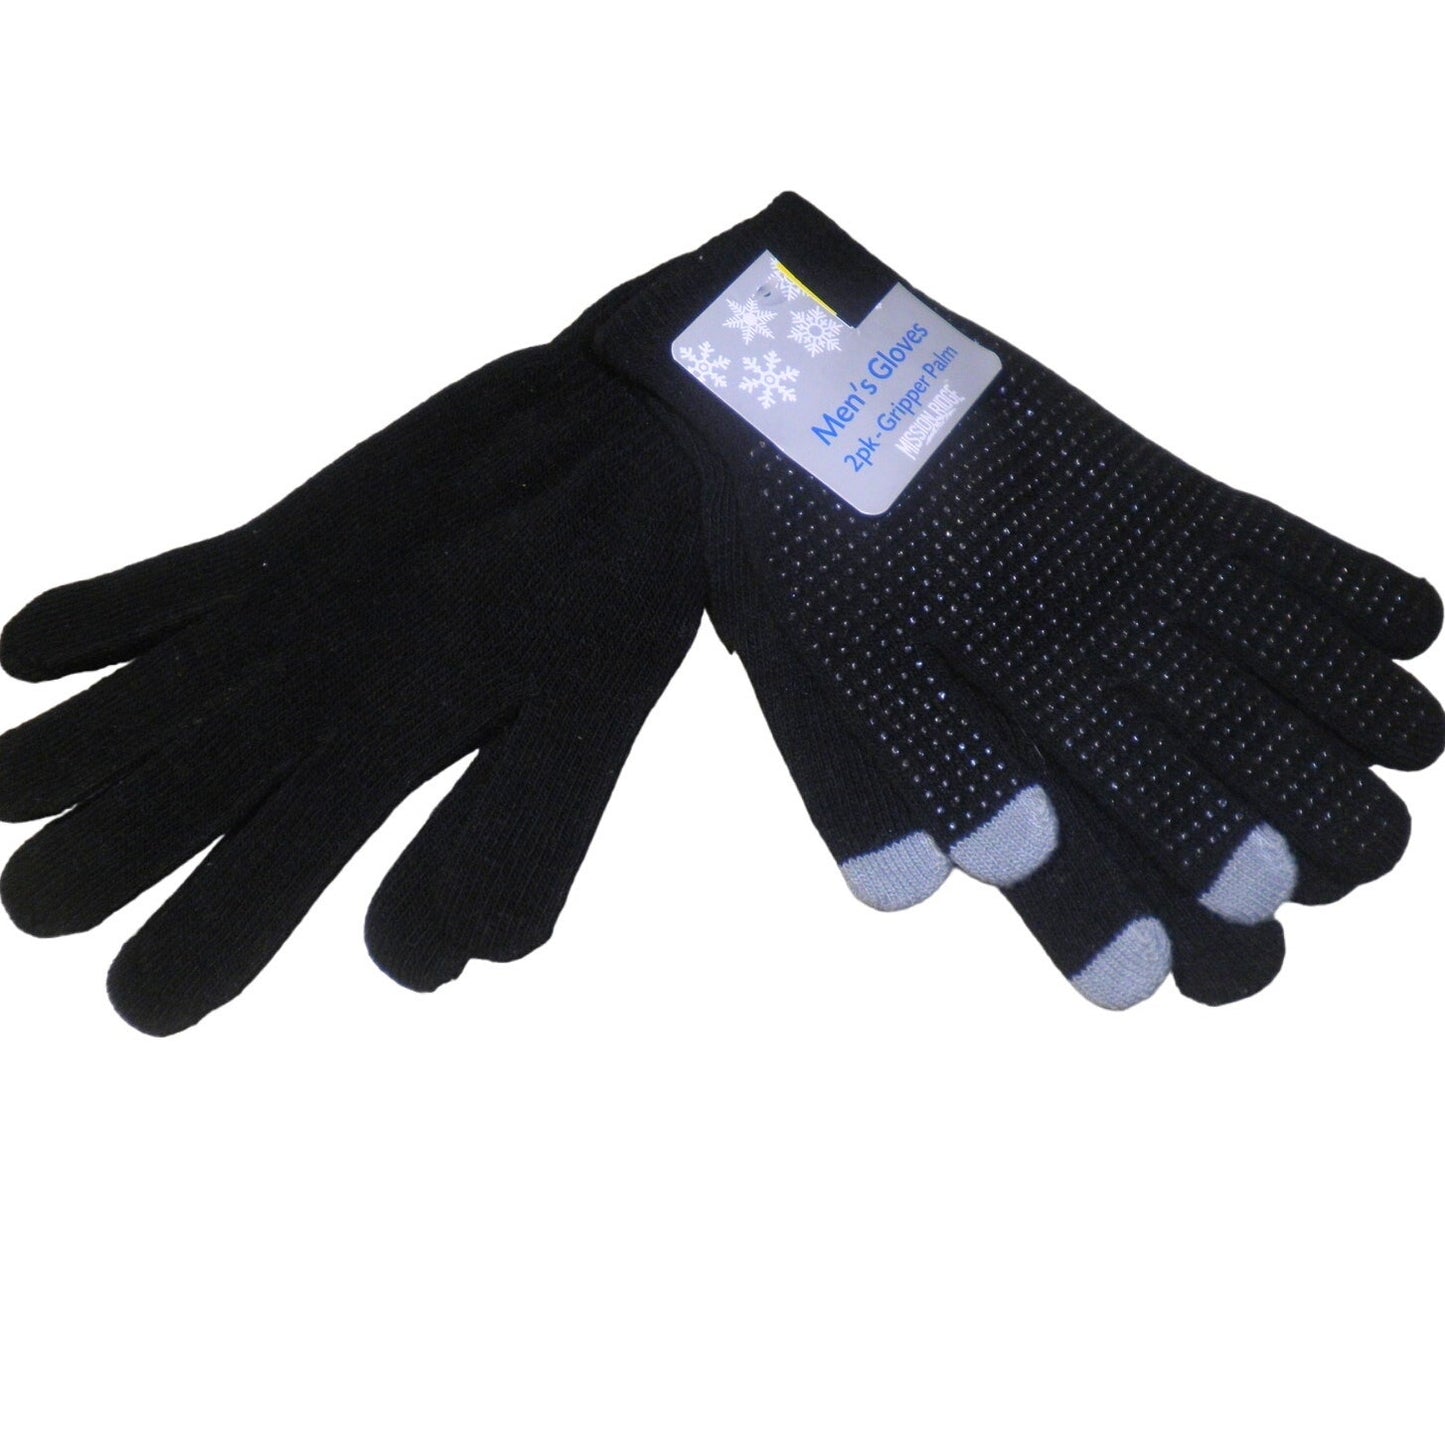 Mens Mission Ridge 2-pack Knitted Gloves, Gripper Palm Gloves, Black, One-Size